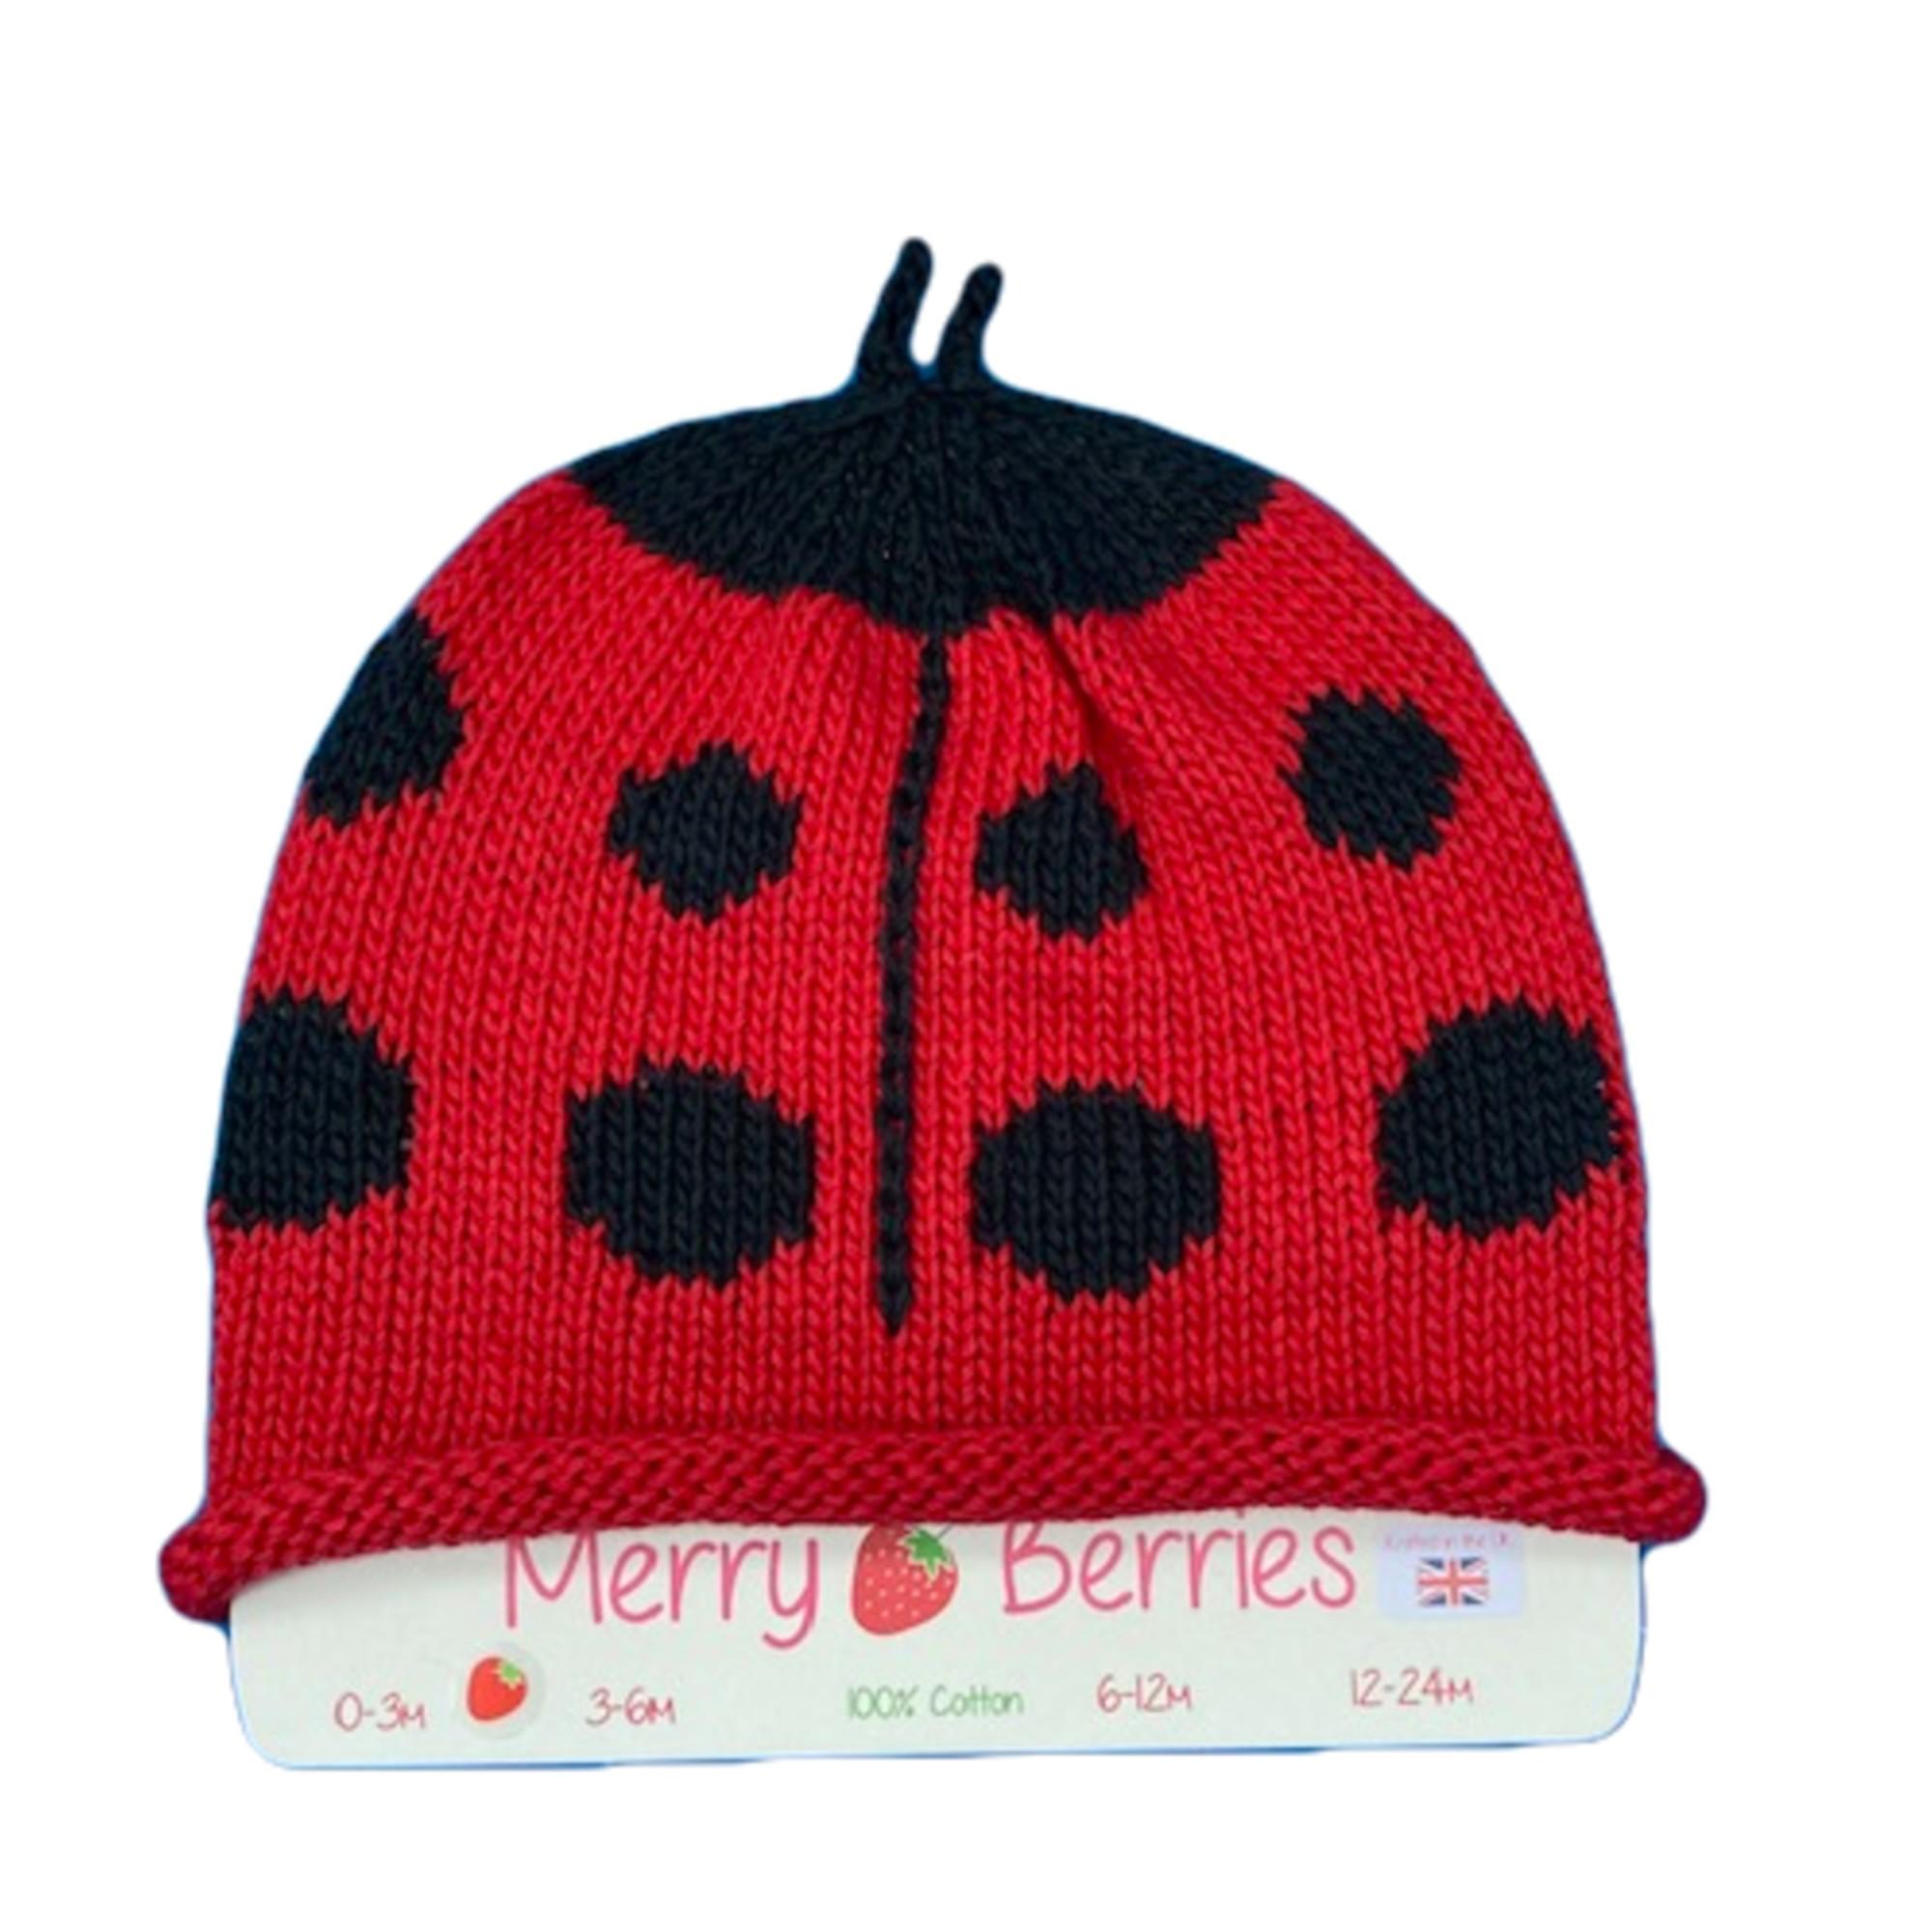 Merry Berries - Ladybird Knitted baby Hat-0-24mths-Cotton